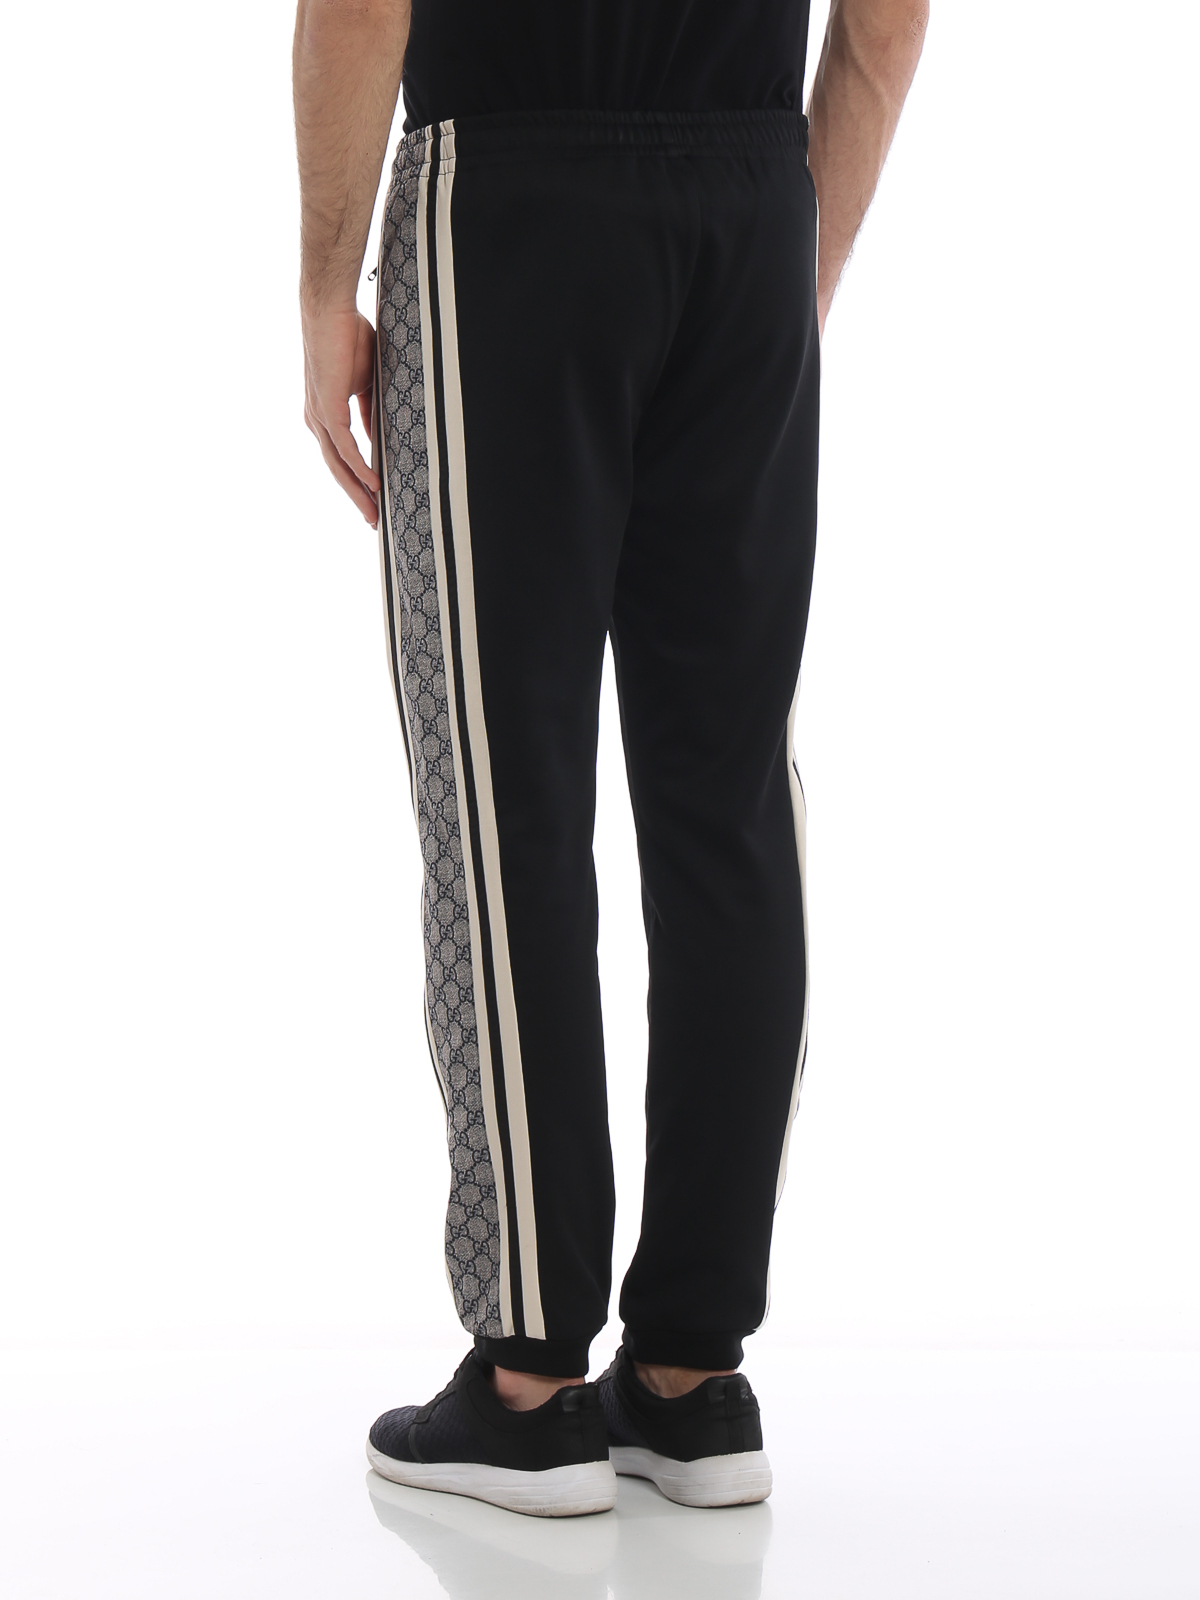 Technical Track Pants - Black With Rope | Night Addict